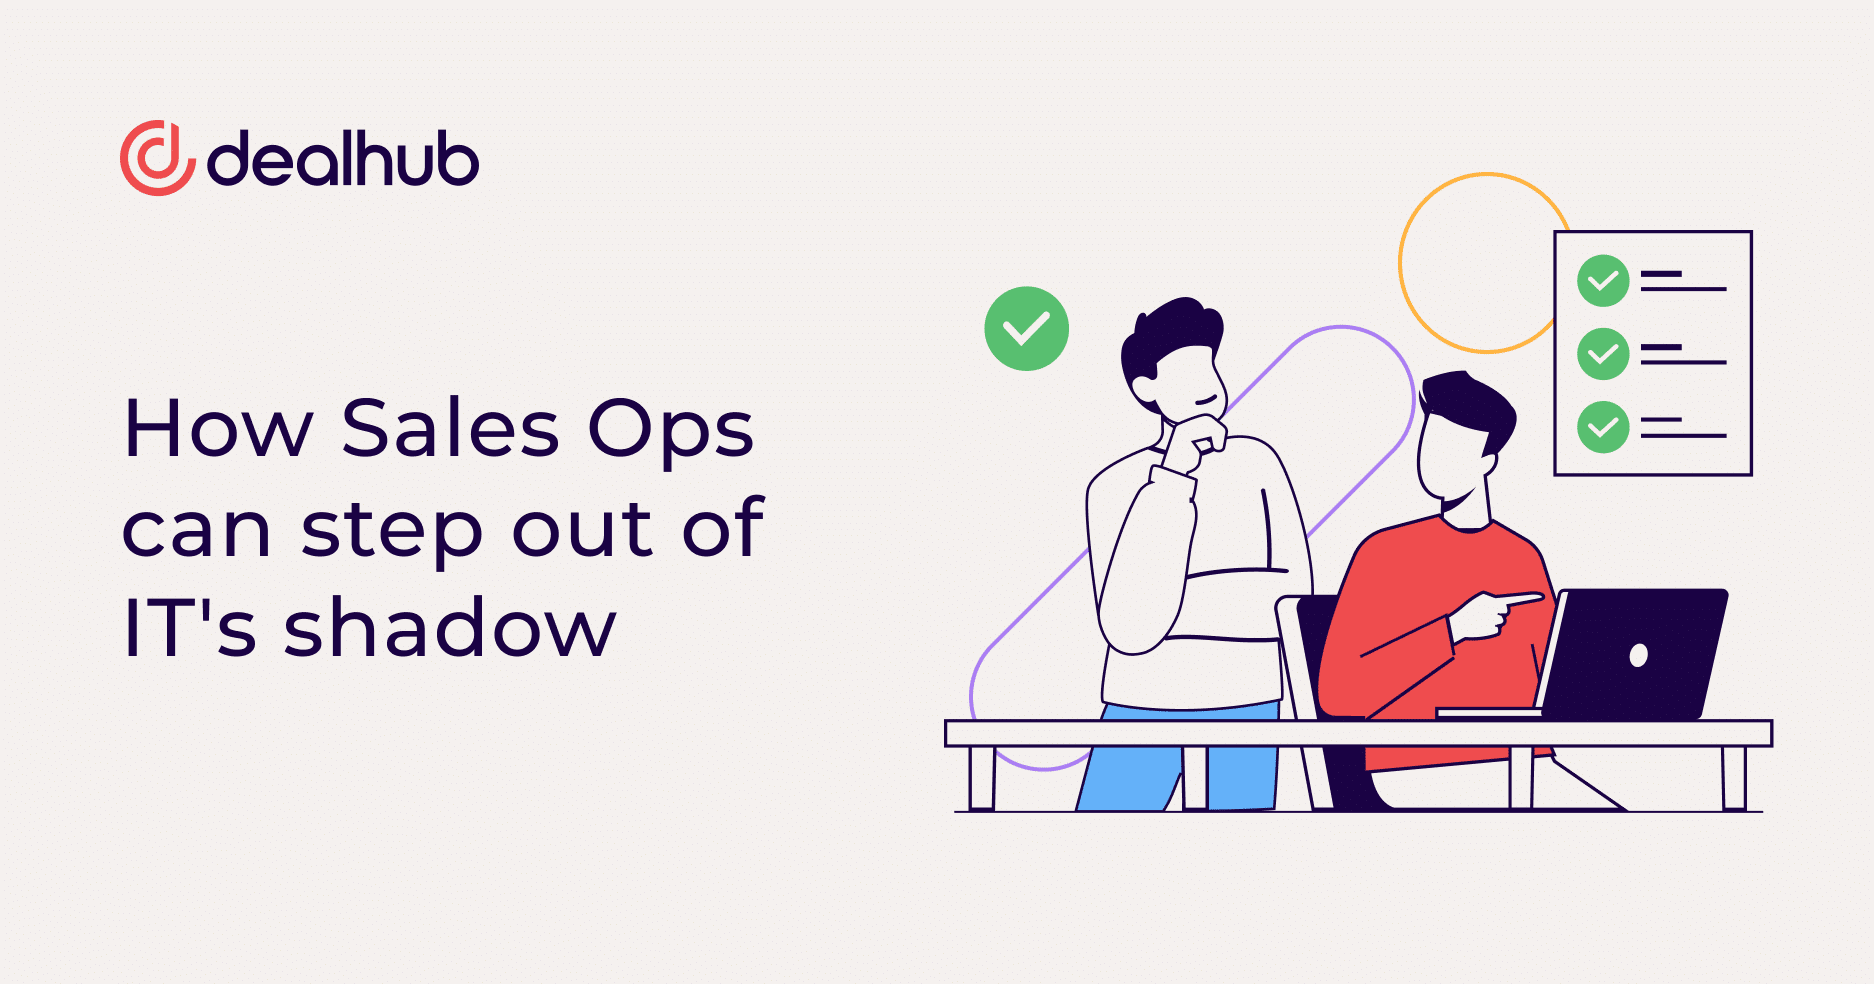 How Sales Ops Can Step Out of IT's Shadow